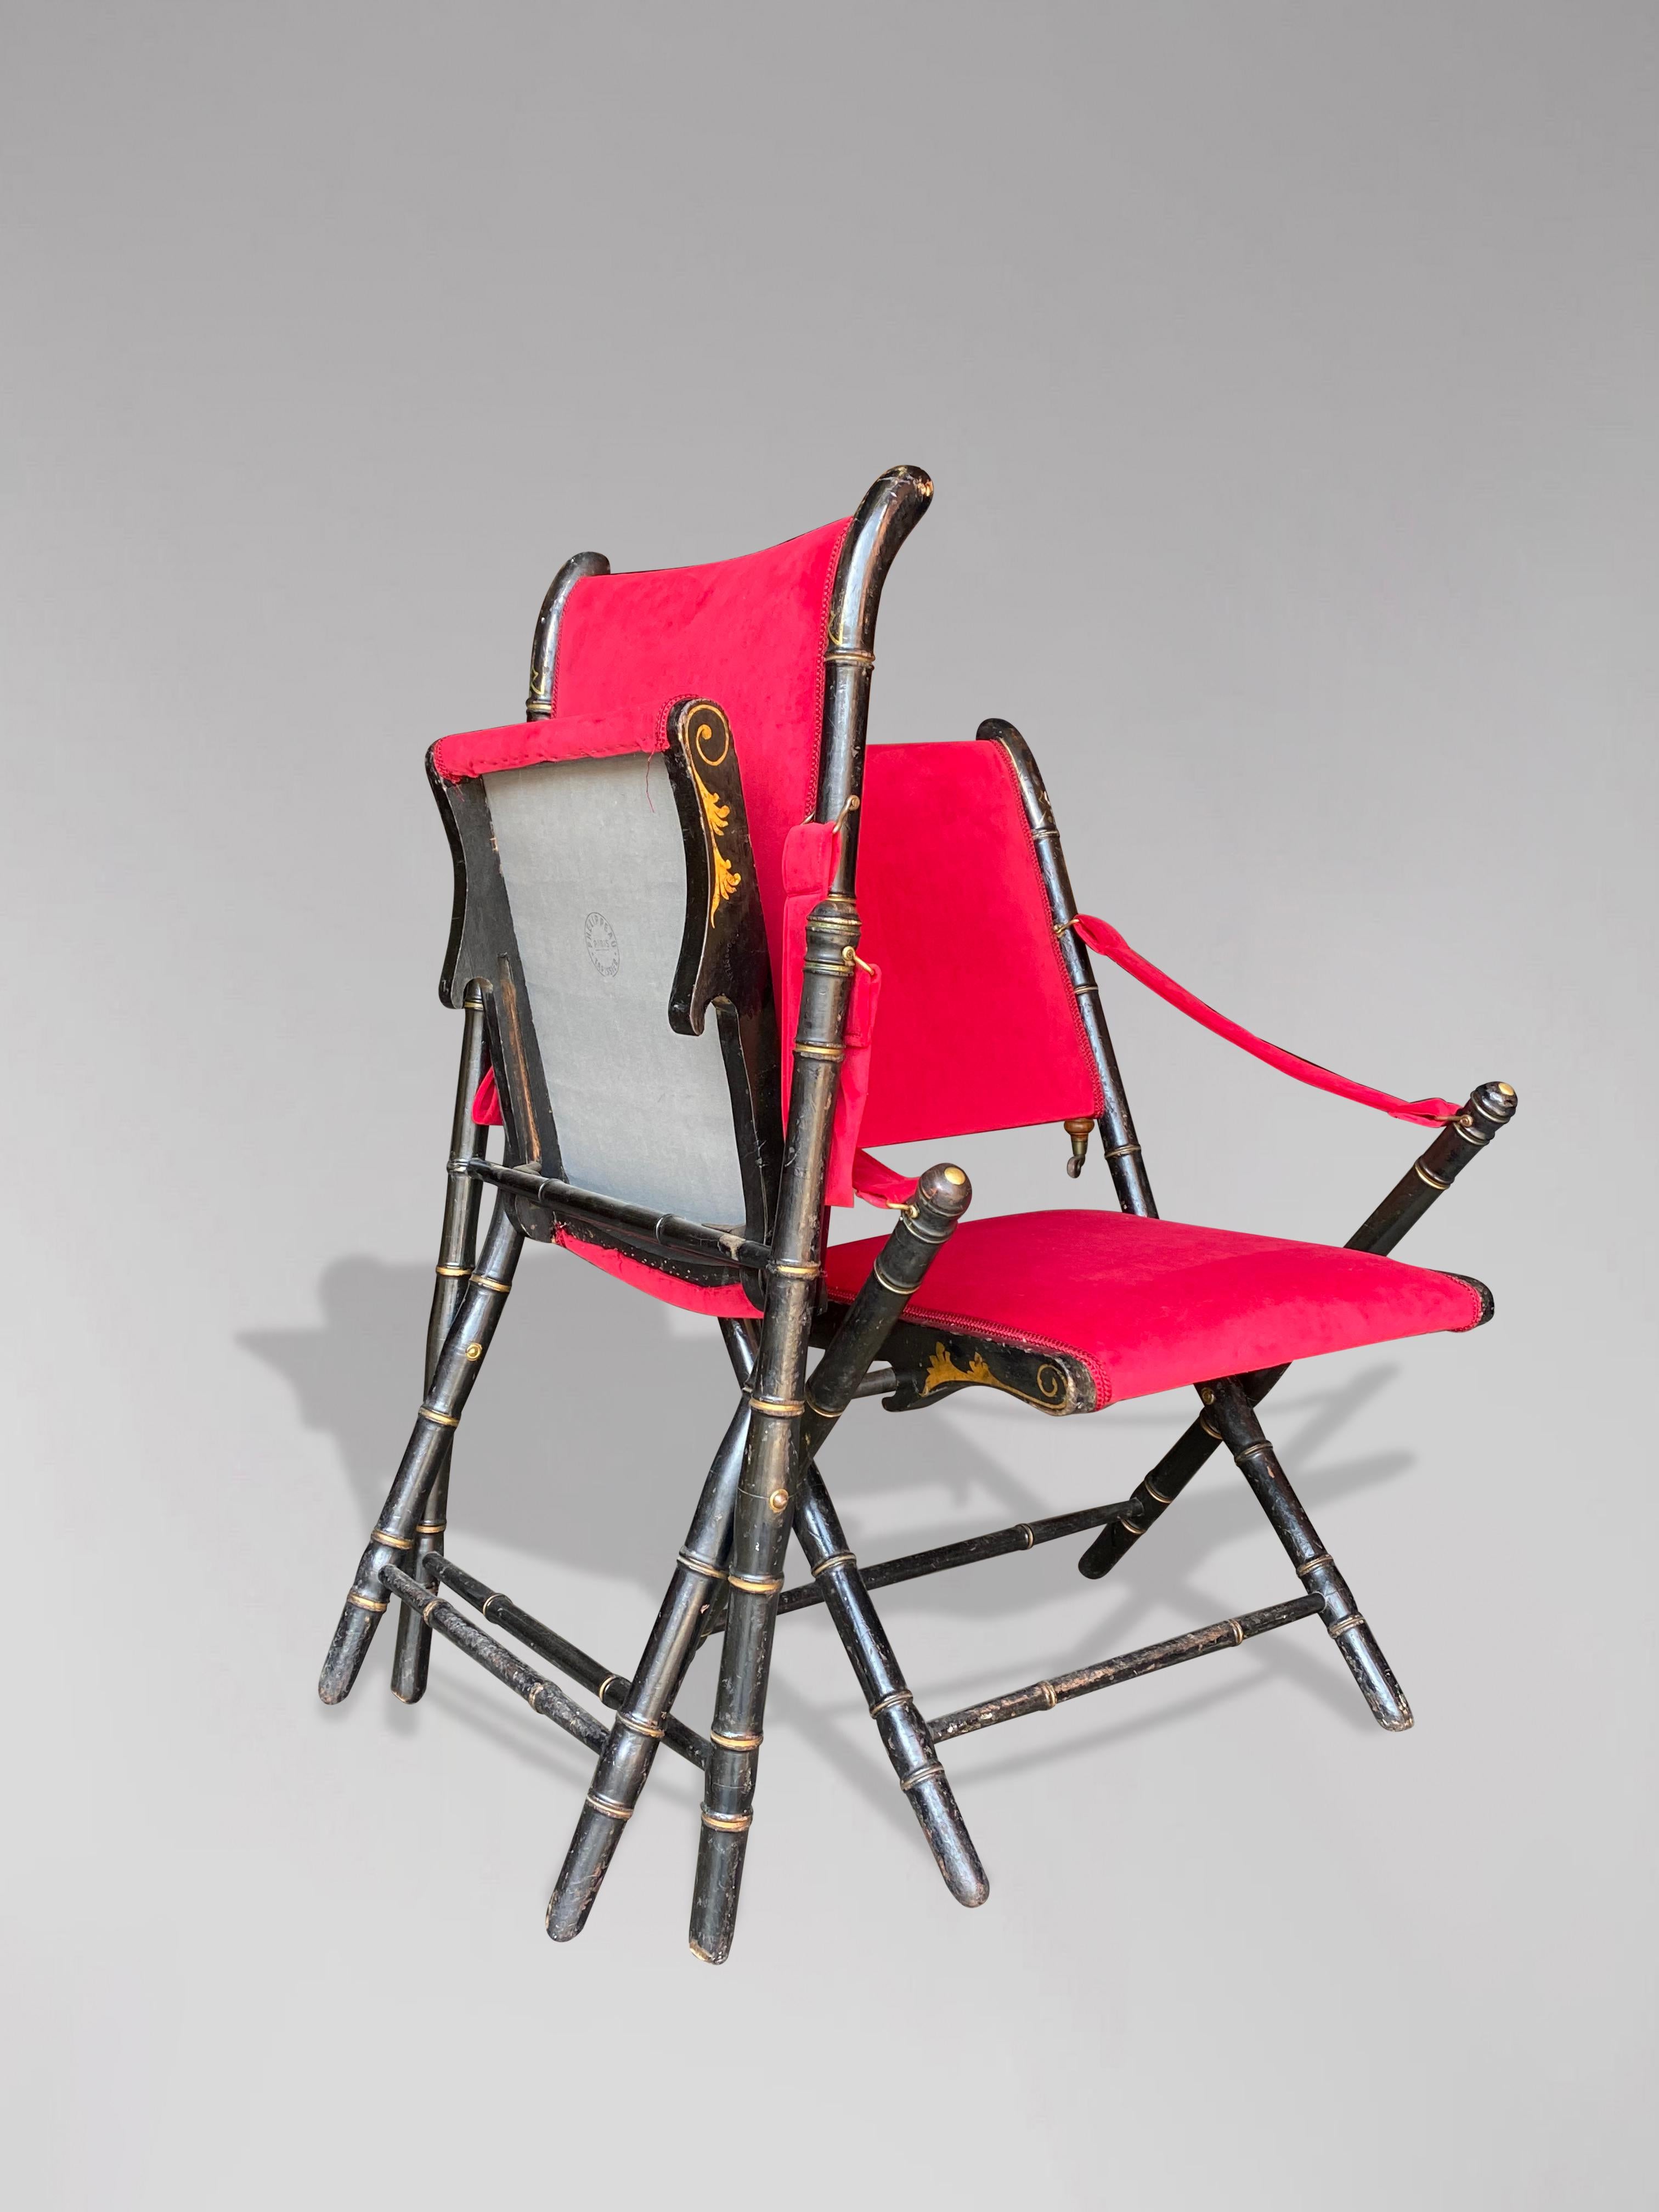 Pair of 19th Century Napoleon III Folding Armchairs In Good Condition For Sale In Petworth,West Sussex, GB